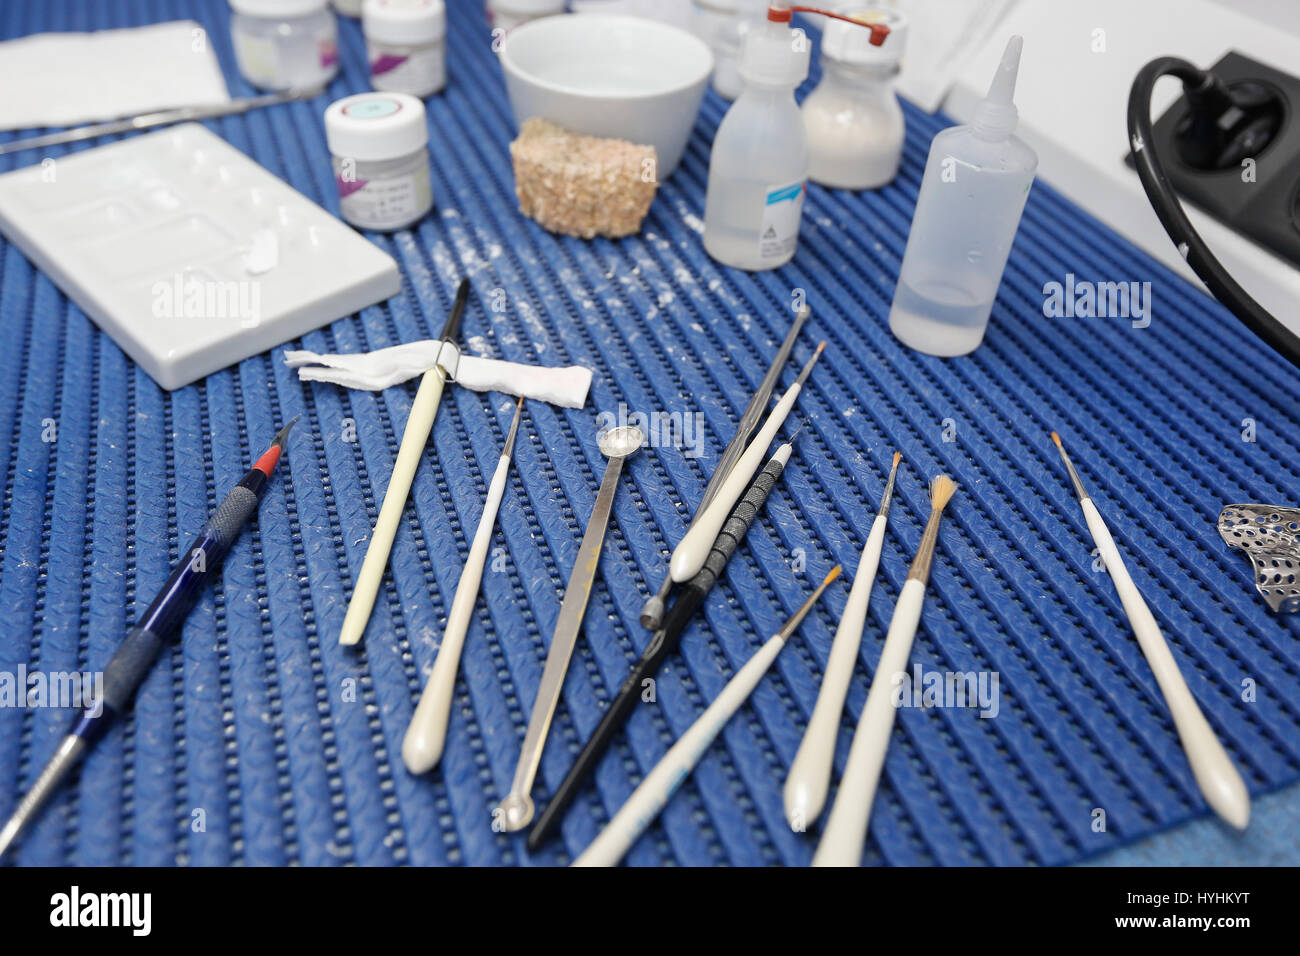 Dental lab tools and instruments for porcelain layering in the process of denture, veneer and implant manufacturing. Dentistry, prostodontics, prosthe Stock Photo